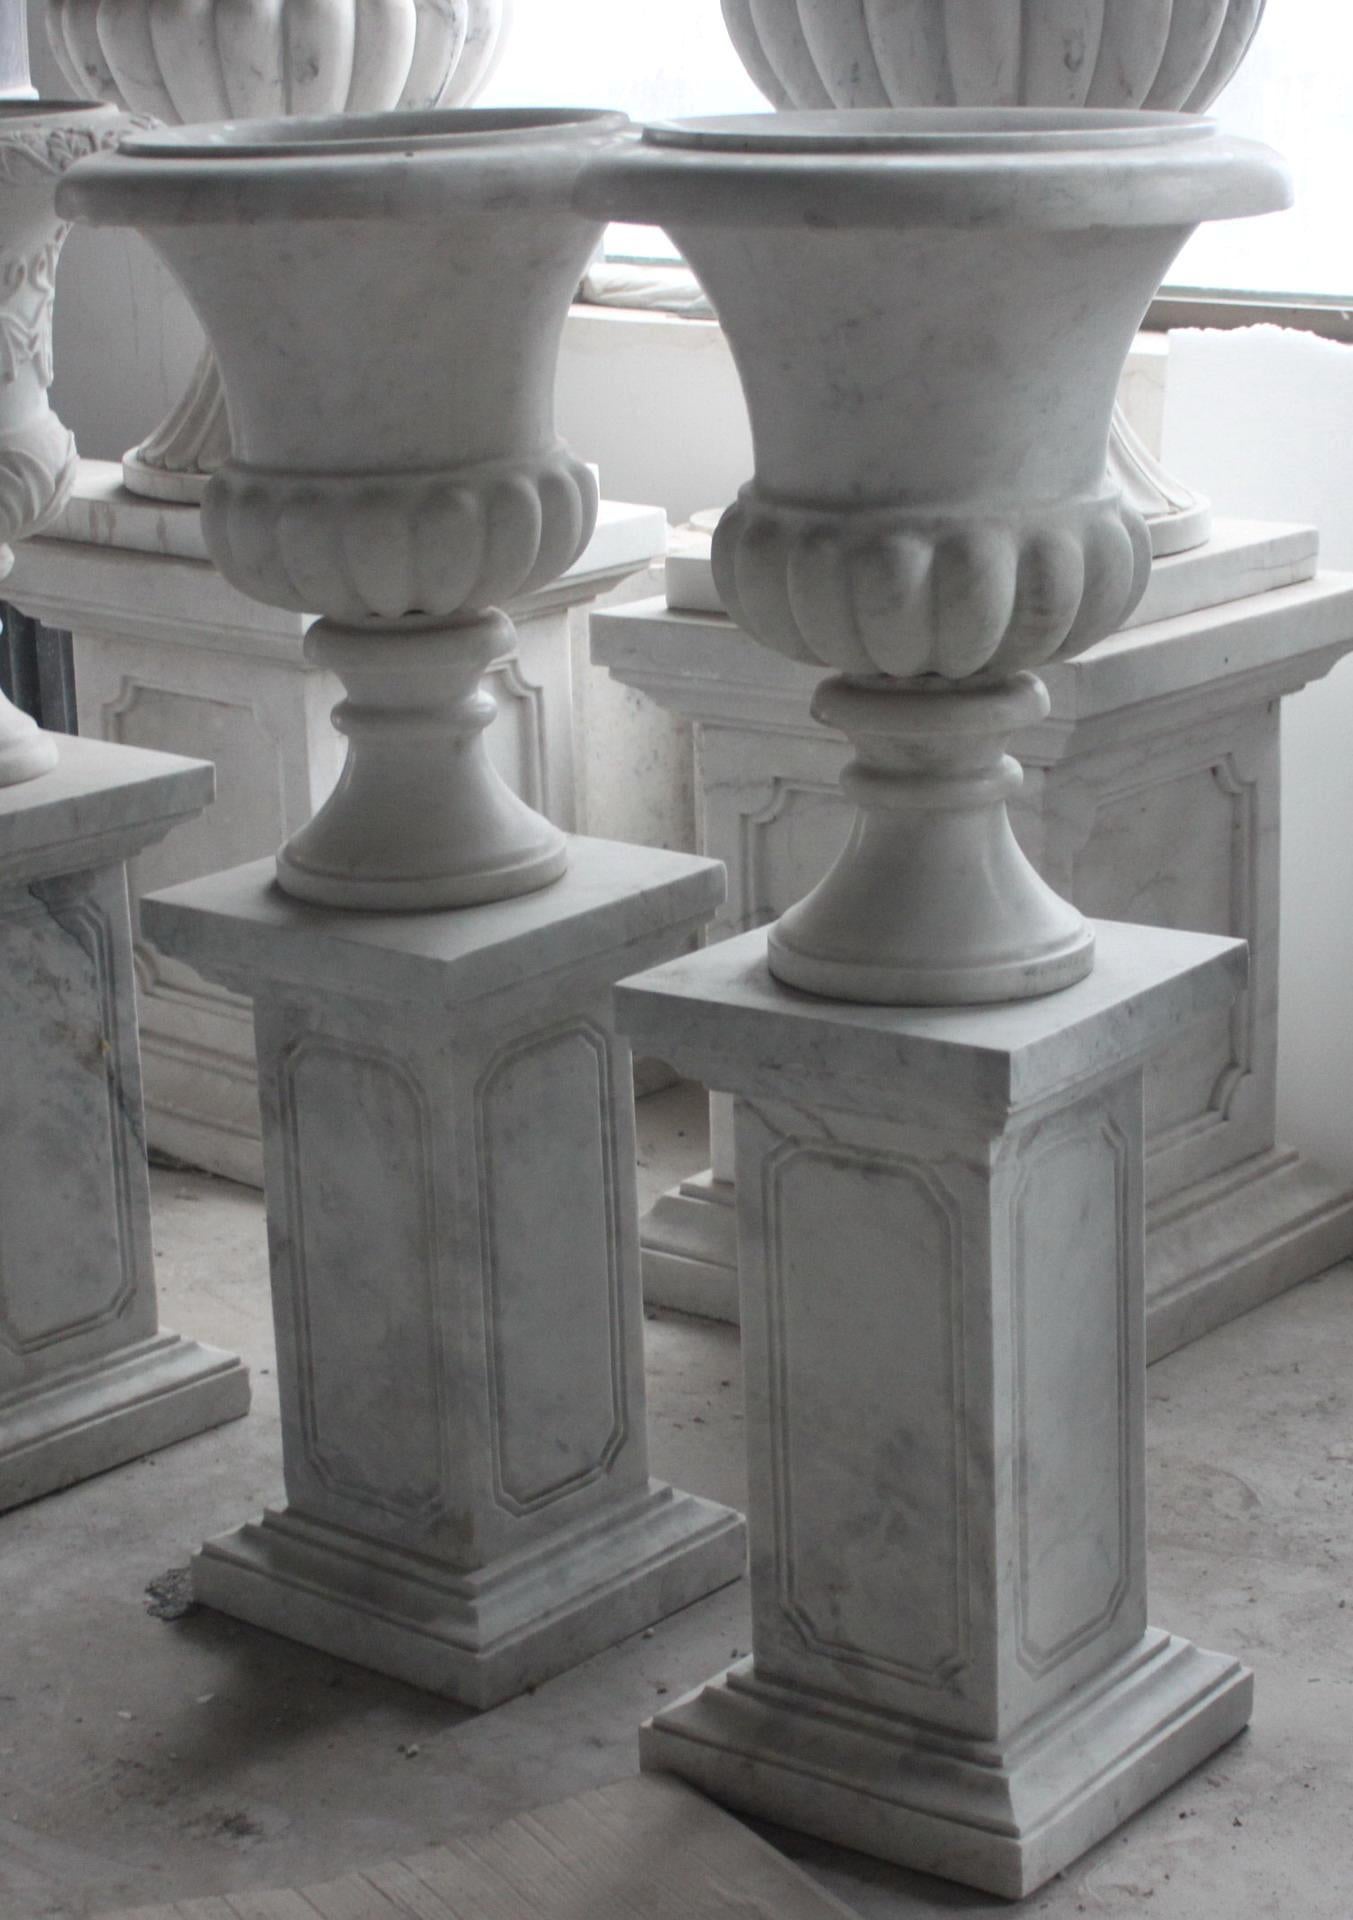 Period 
late 20th century, antique style

Composition 
carved white Hunan marble

Measures: 
Diameter 46 cm / 18 in
Height 117 cm / 46 in




Pair of Classical style carved marble urns on plinth pedestals

Heavy, fine detail. Very